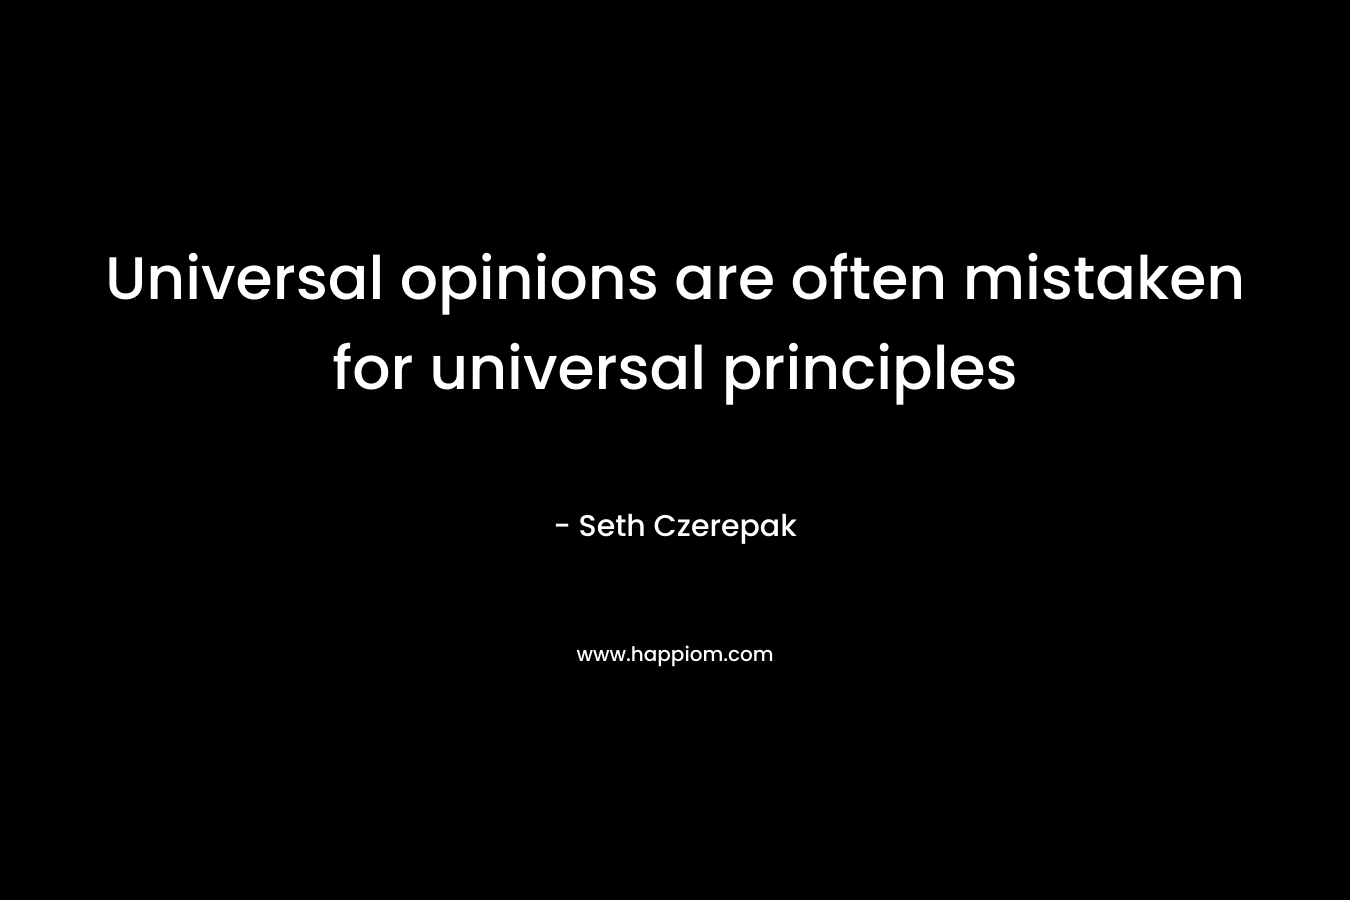 Universal opinions are often mistaken for universal principles